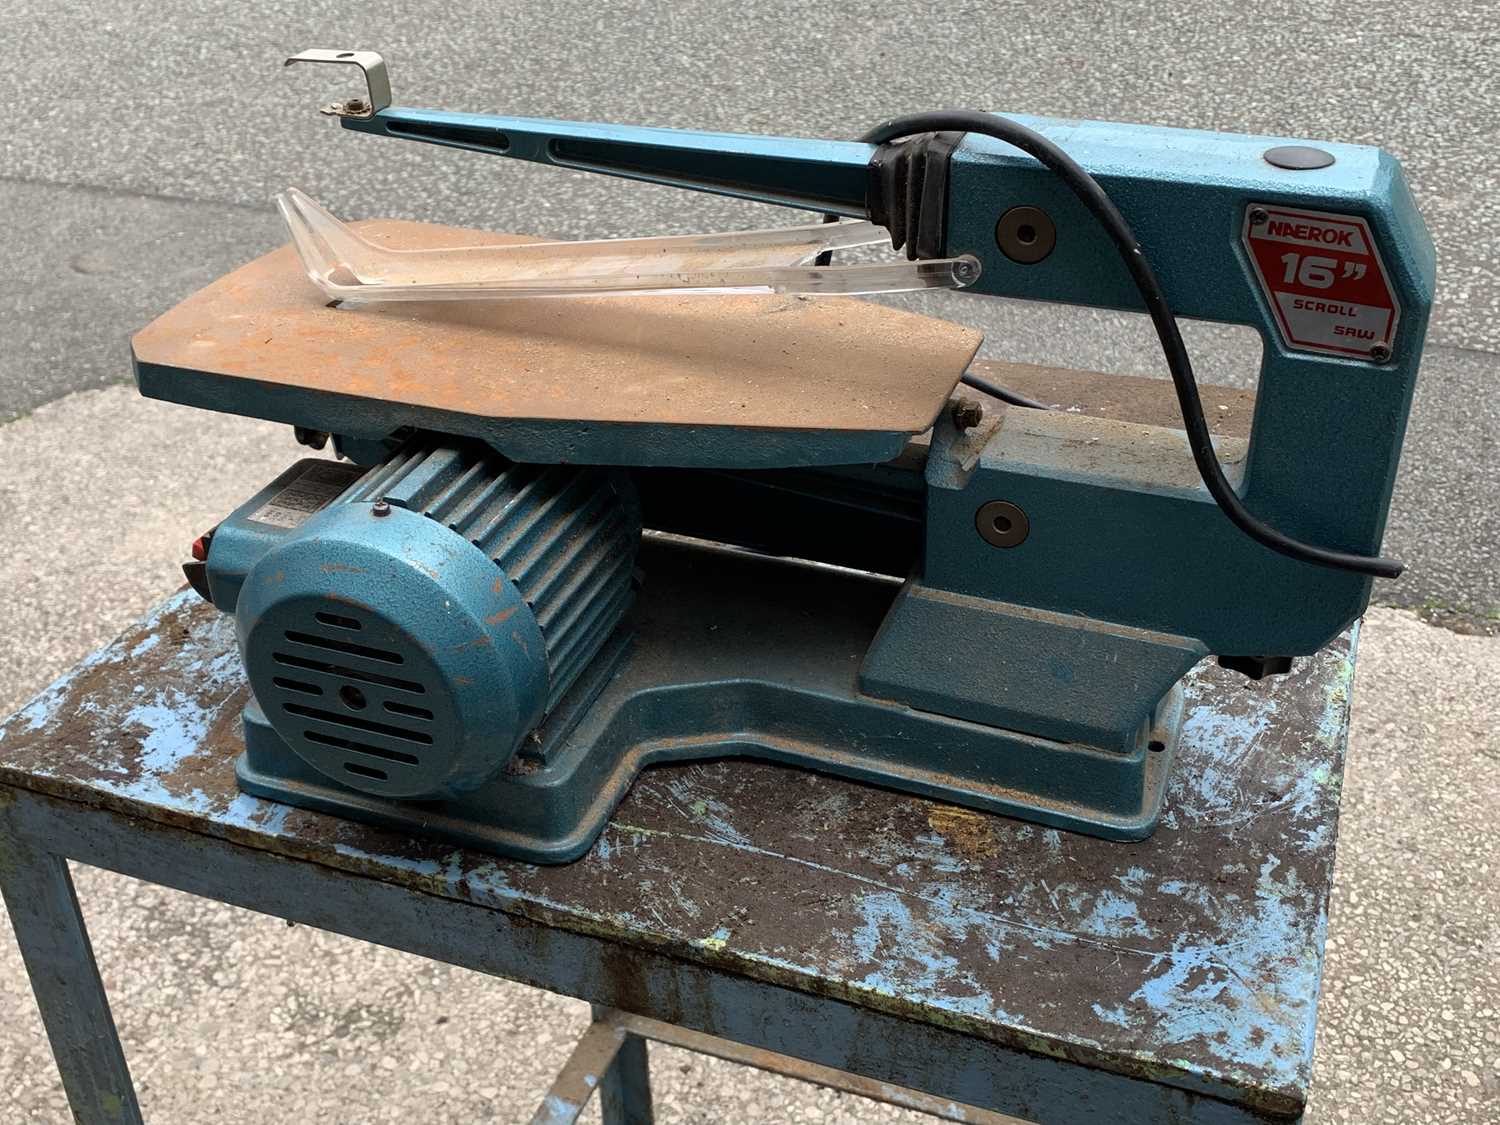 PILLAR DRILL - Tull International LT-13J, a Naerok 16ins scroll saw and a heavy metal work table, - Image 3 of 5